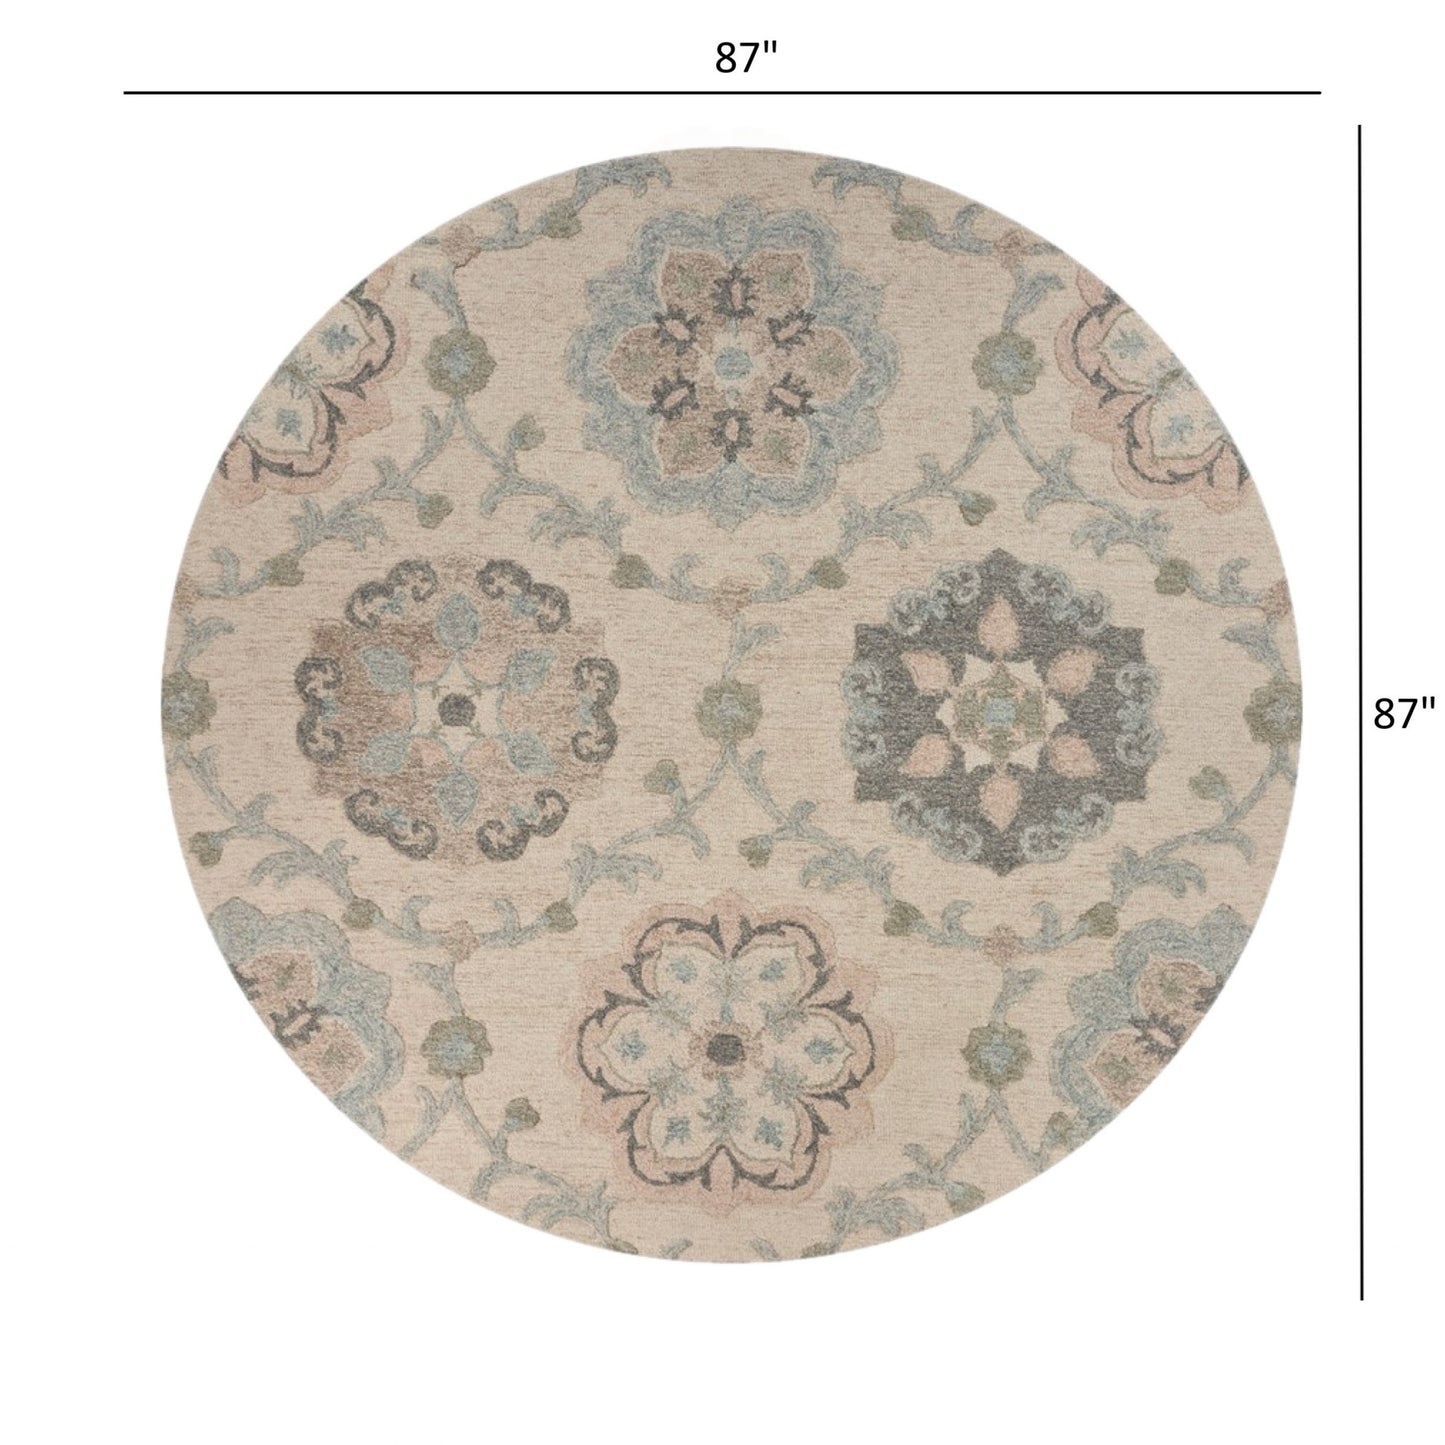 5' Blue And Ivory Round Wool Hand Tufted Area Rug